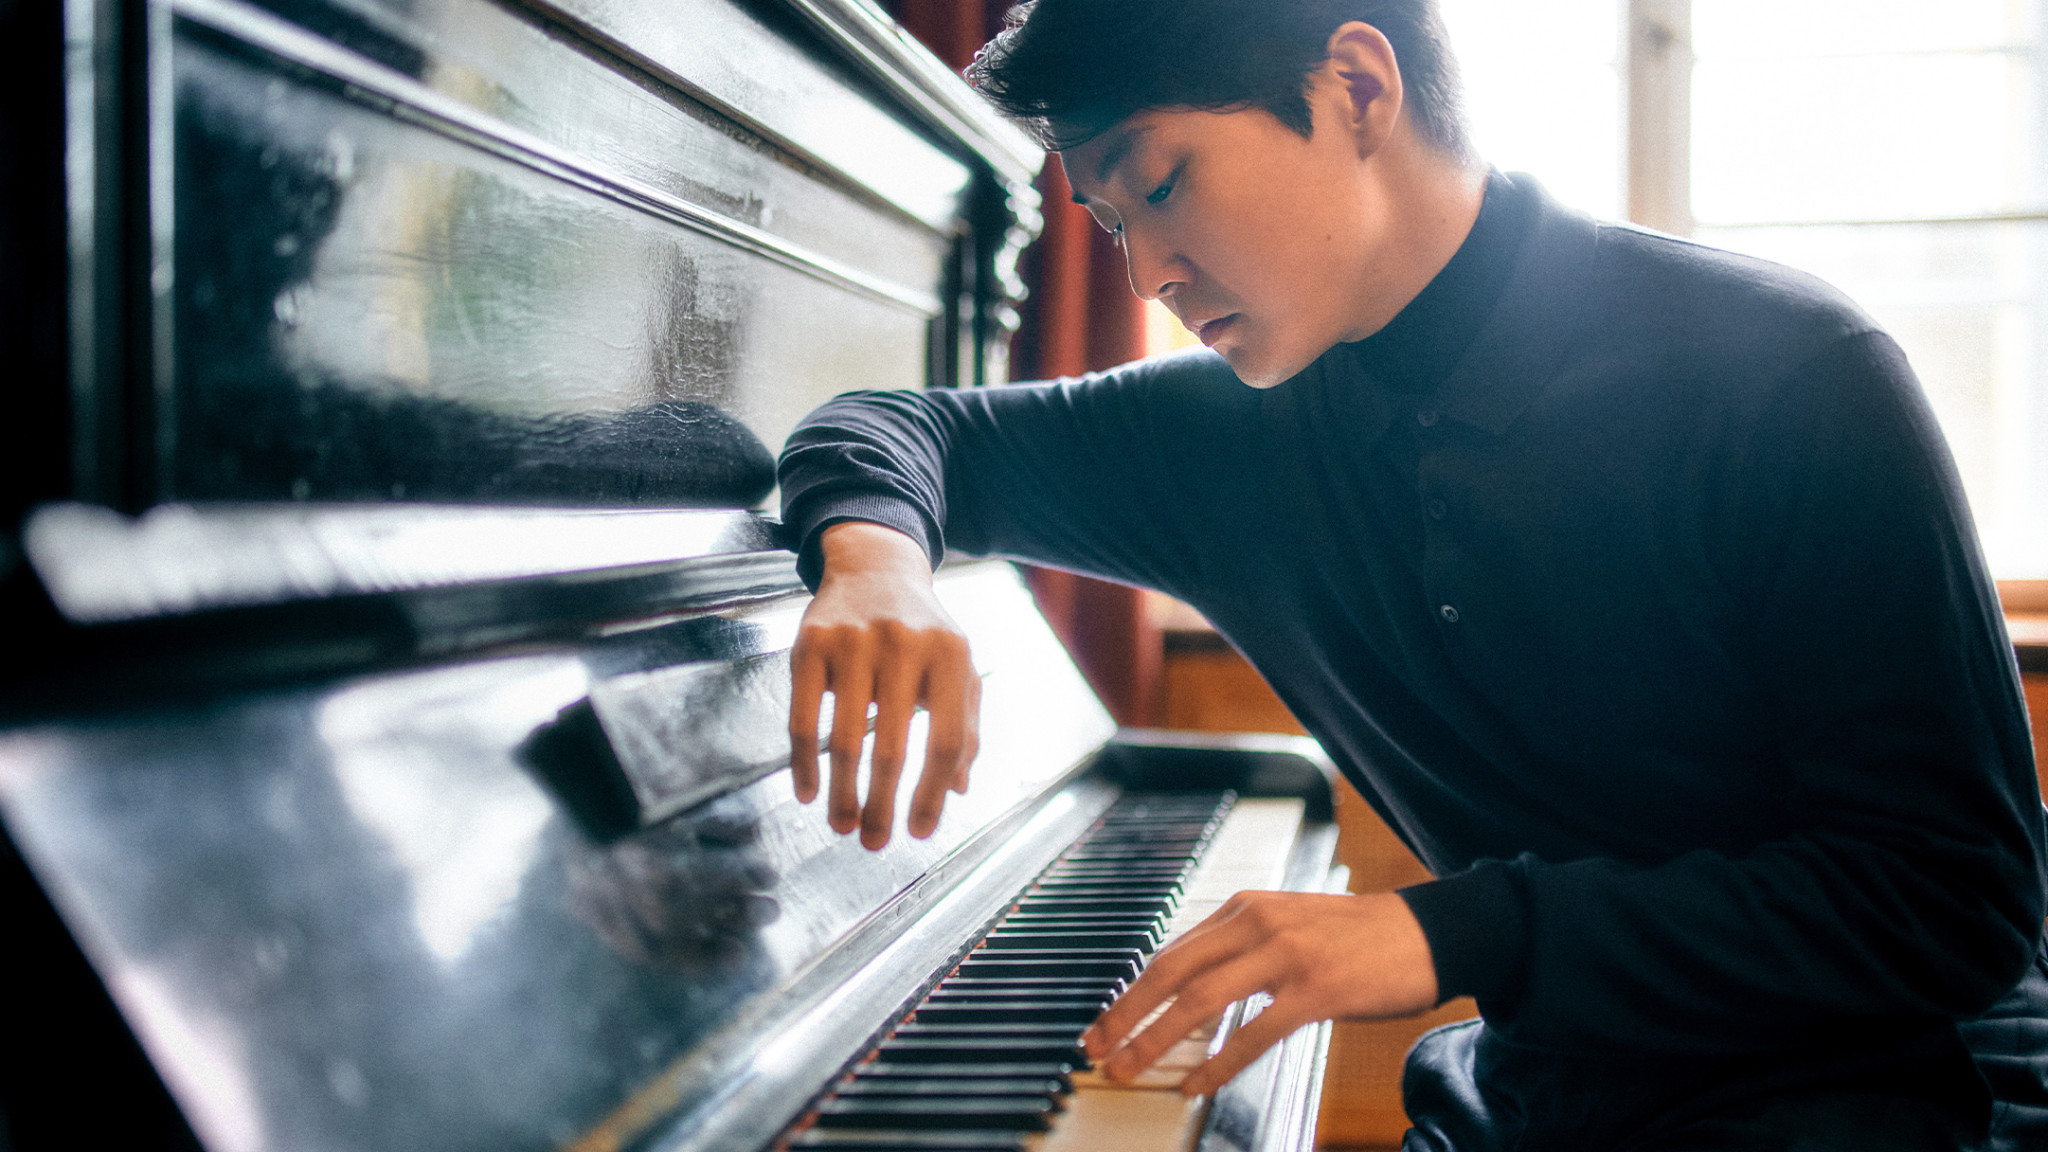 Seong-Jin Cho releases sixth album on DG celebrating the music of Chopin